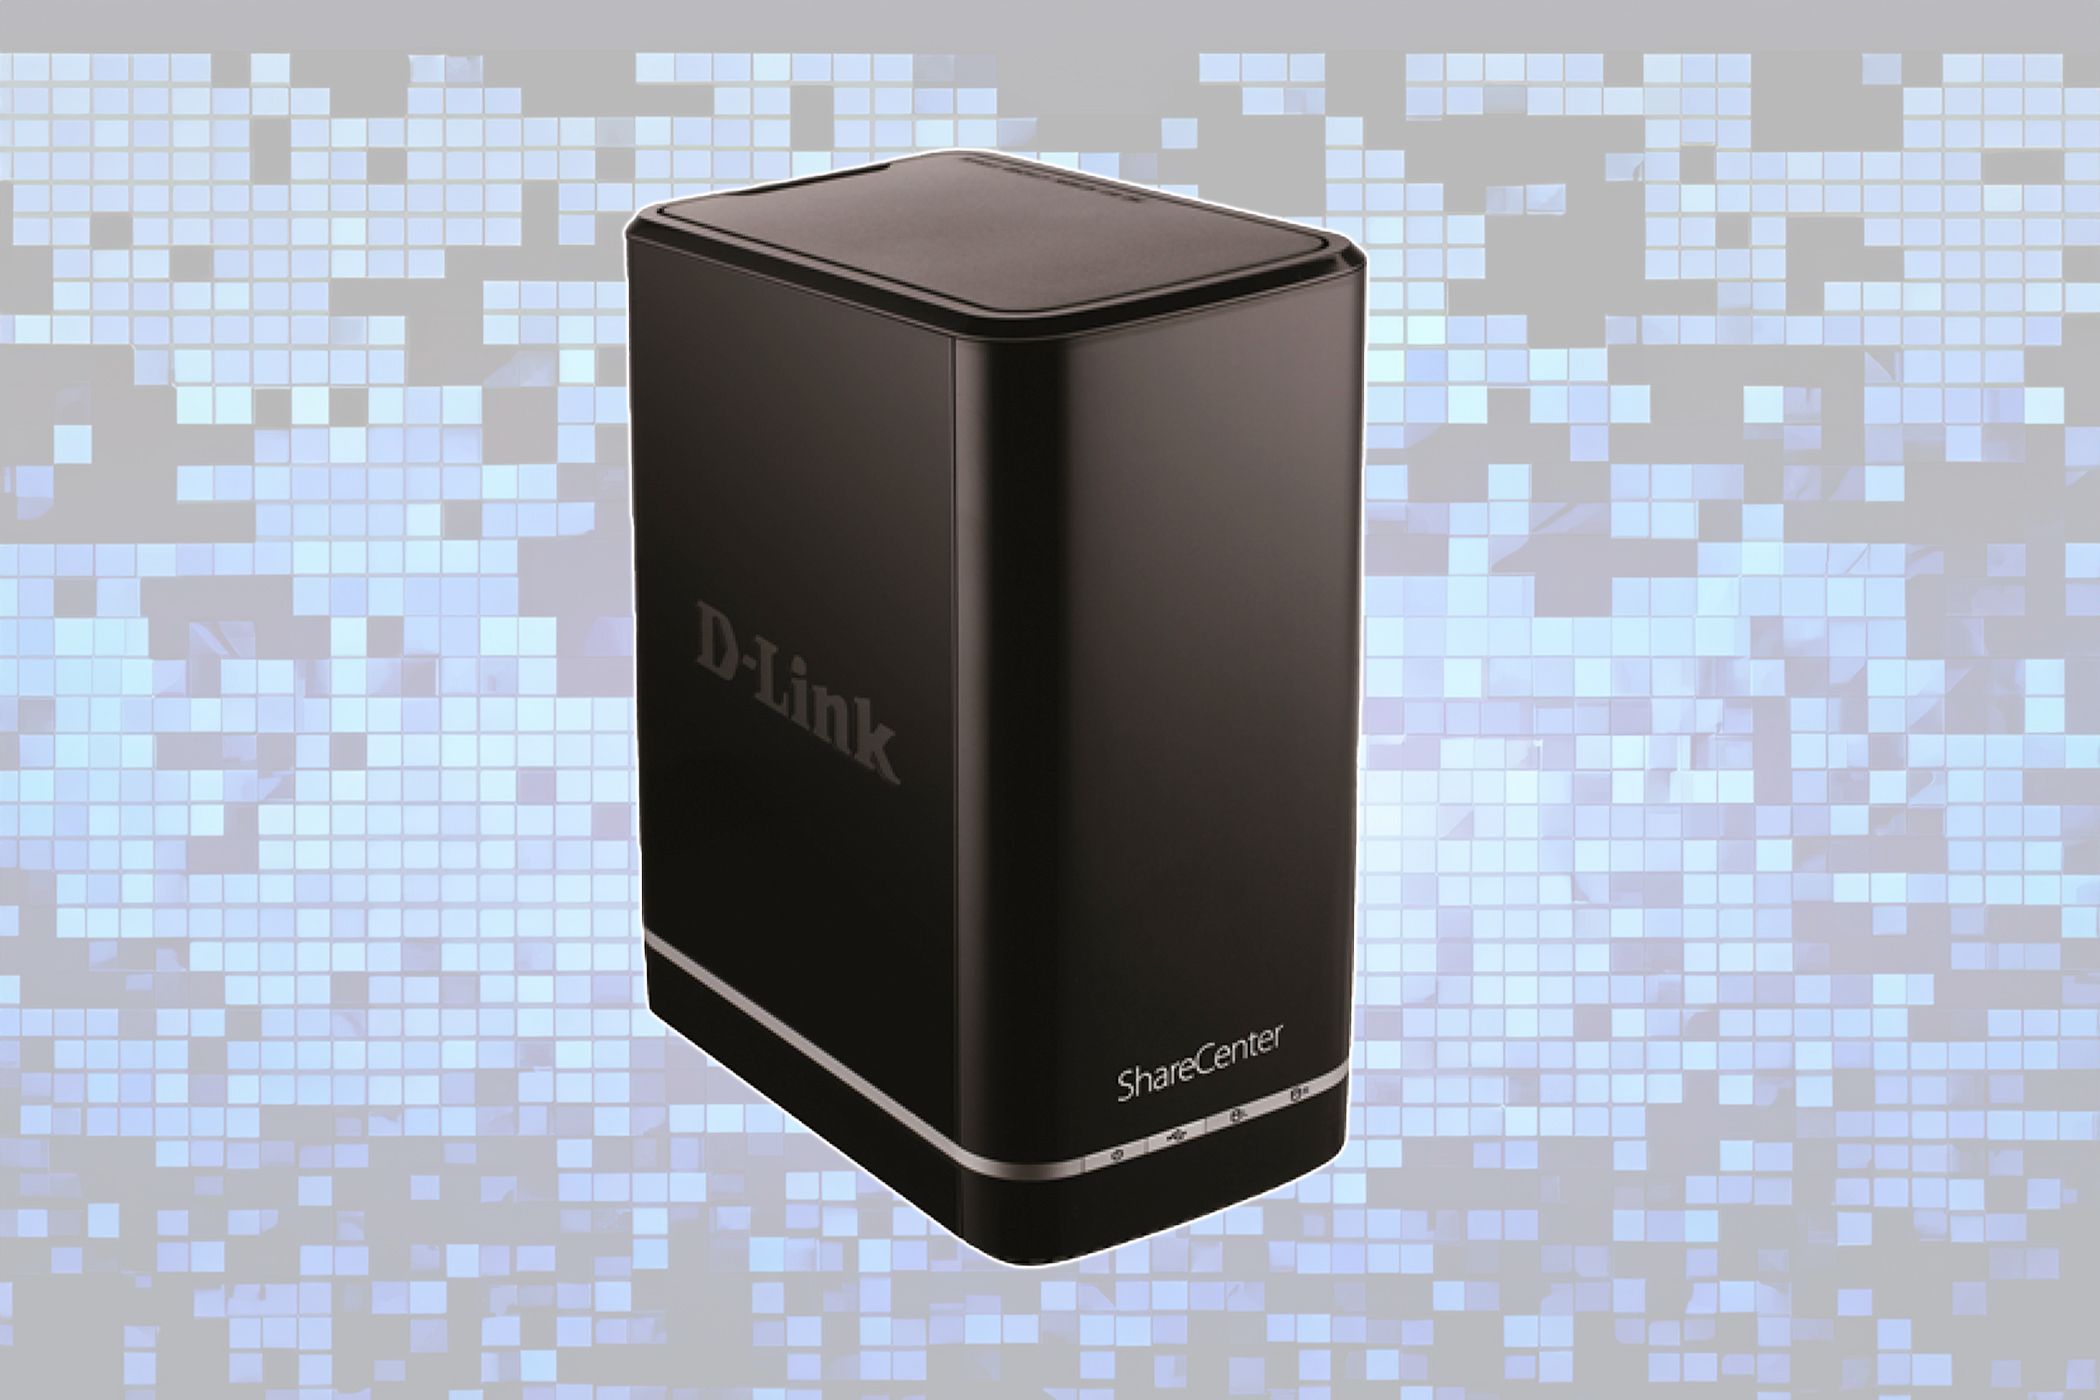 The D-Link DNS-320L NAS on a pixelated background.